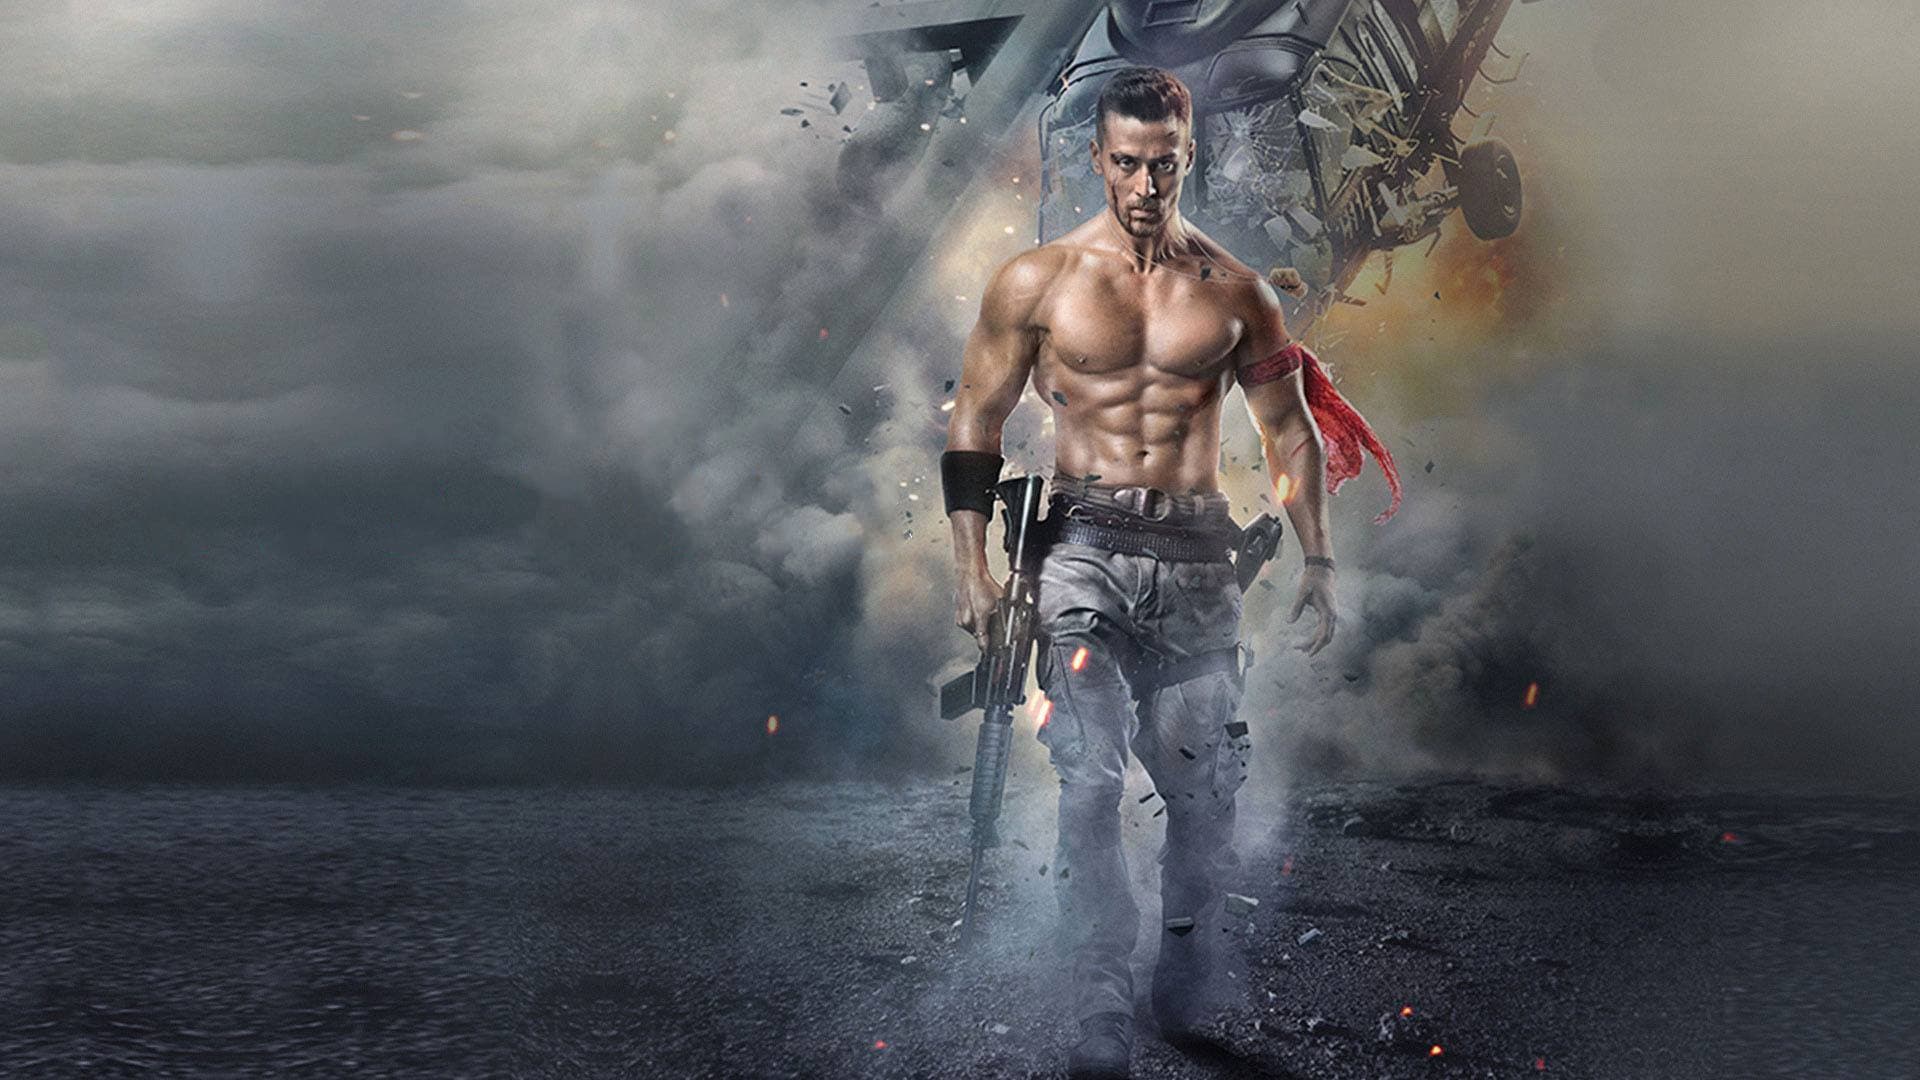 720p baaghi download 2 2018 movie hd Download Baaghi